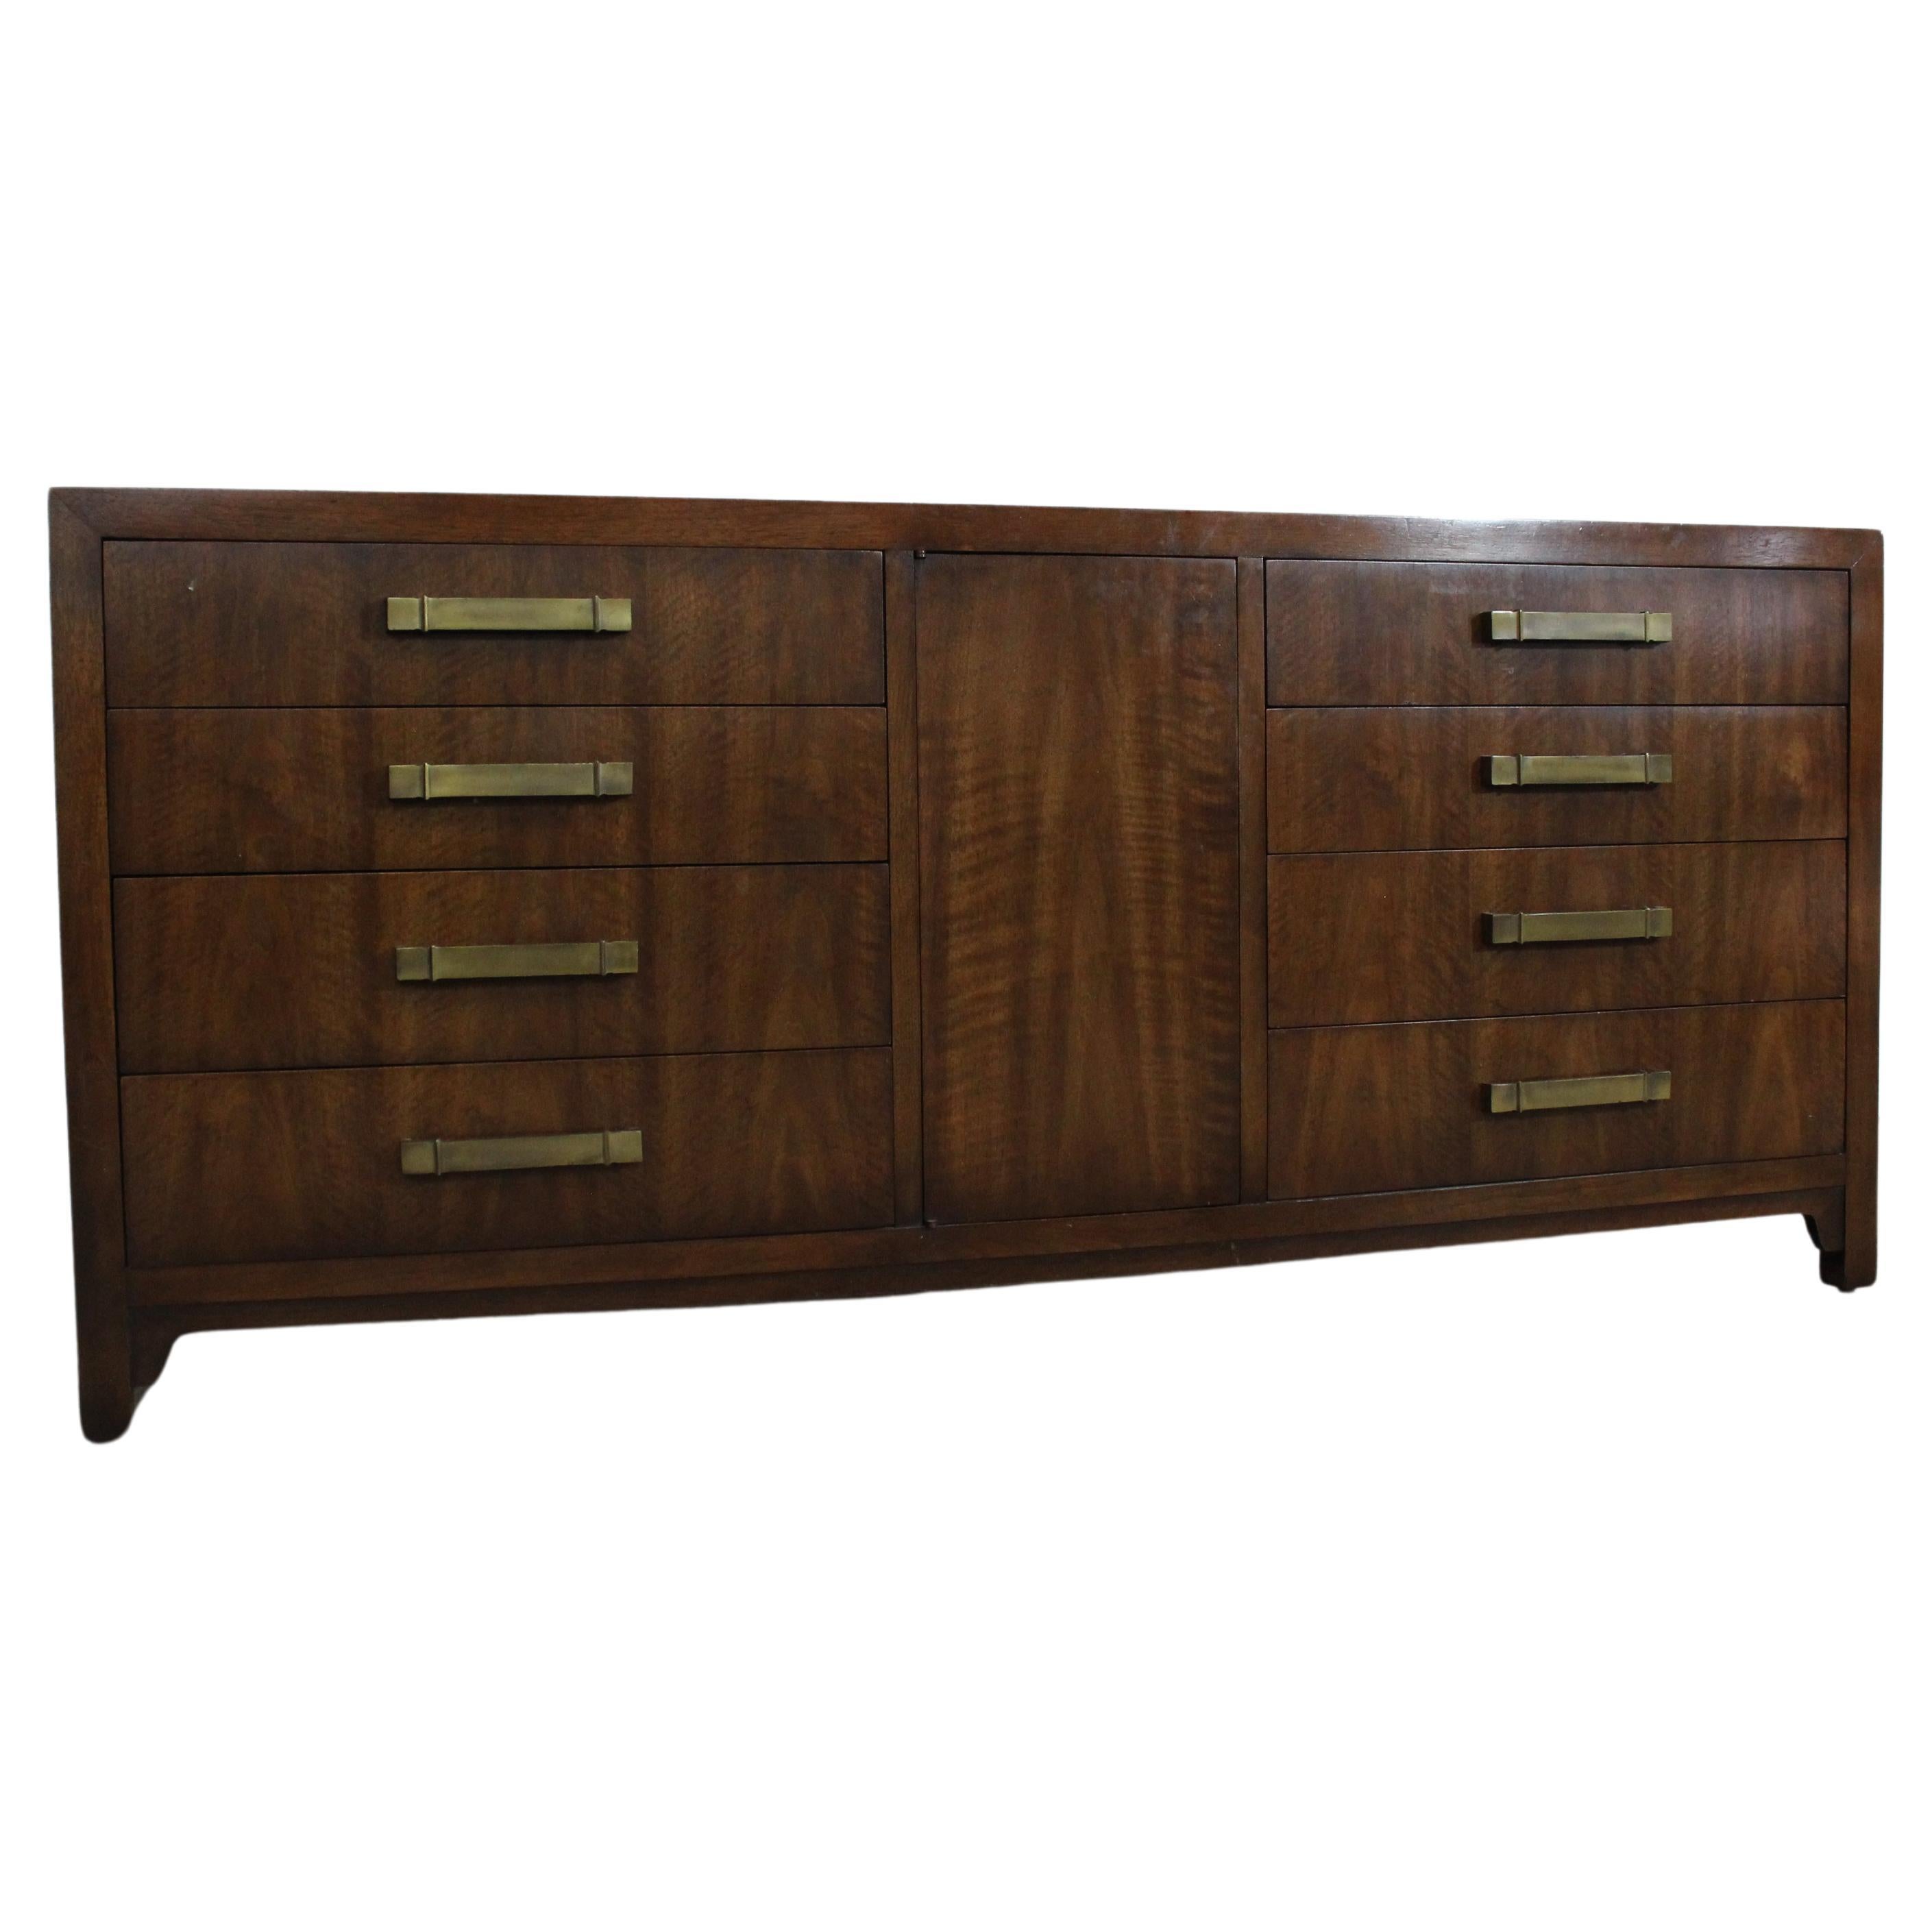 Mid-Century Modern Asain Credenza/Dresser Black Mahoghany by Heritage Furniture For Sale